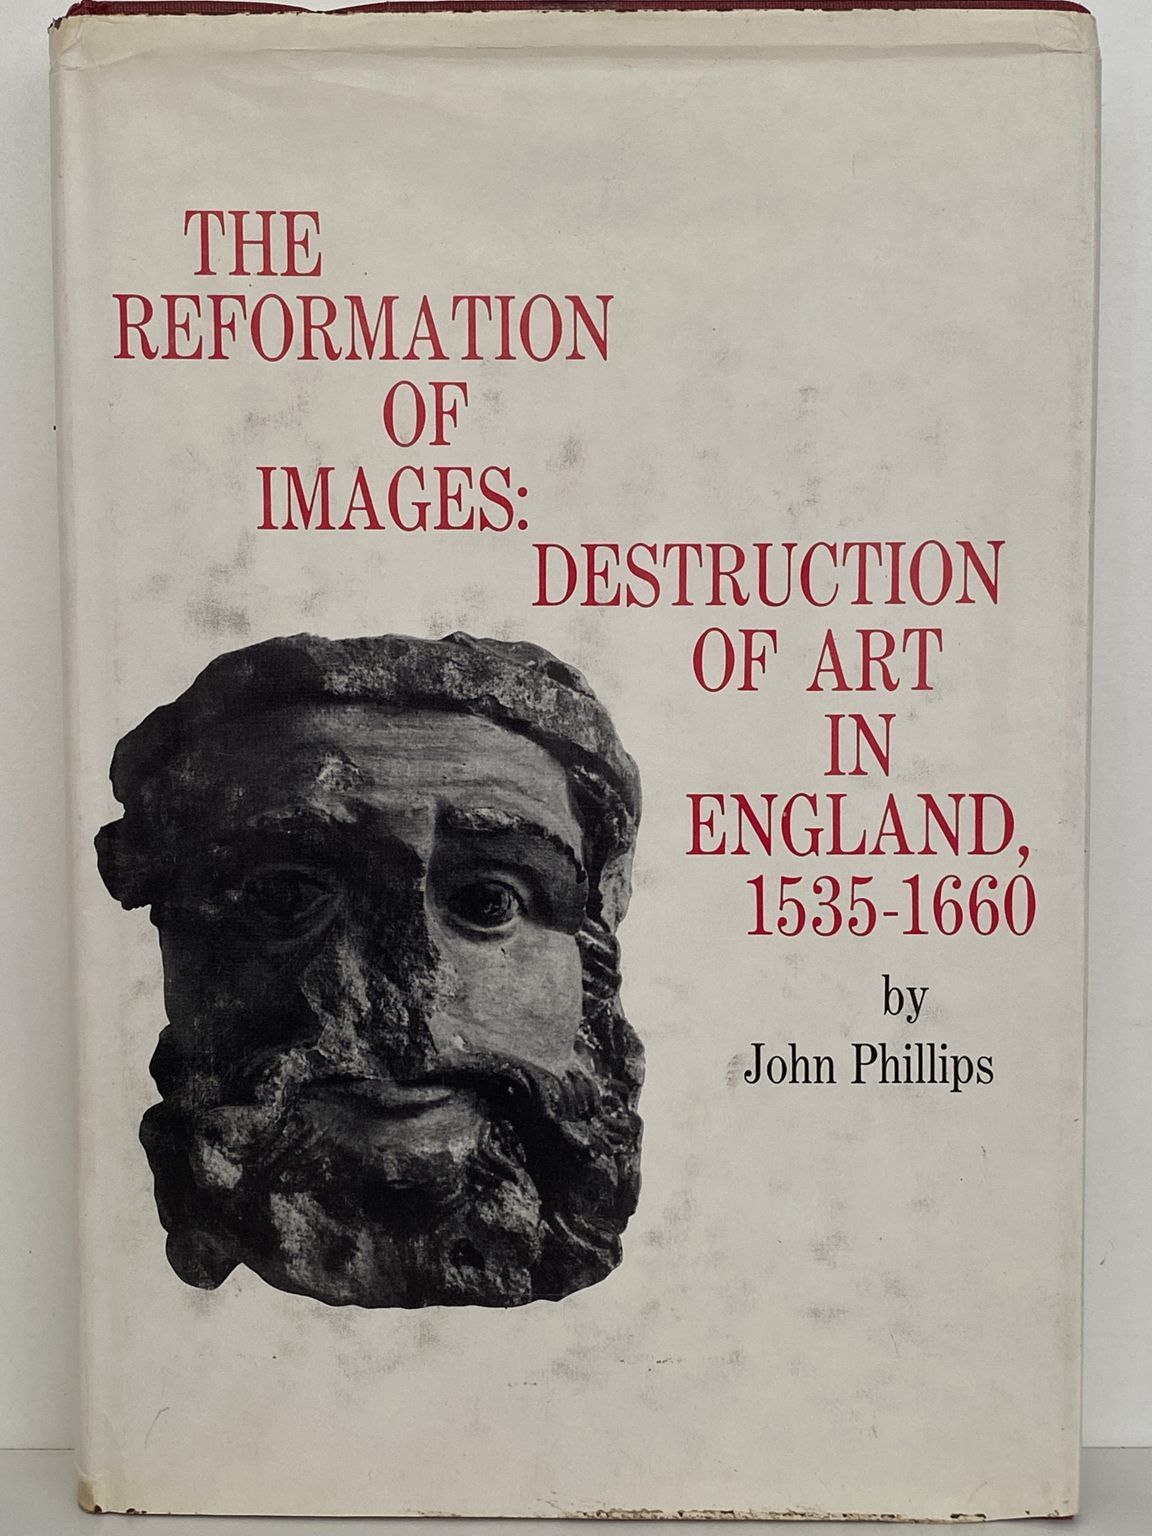 THE REFORMATION OF IMAGES: Destruction of Art in England 1535-1660